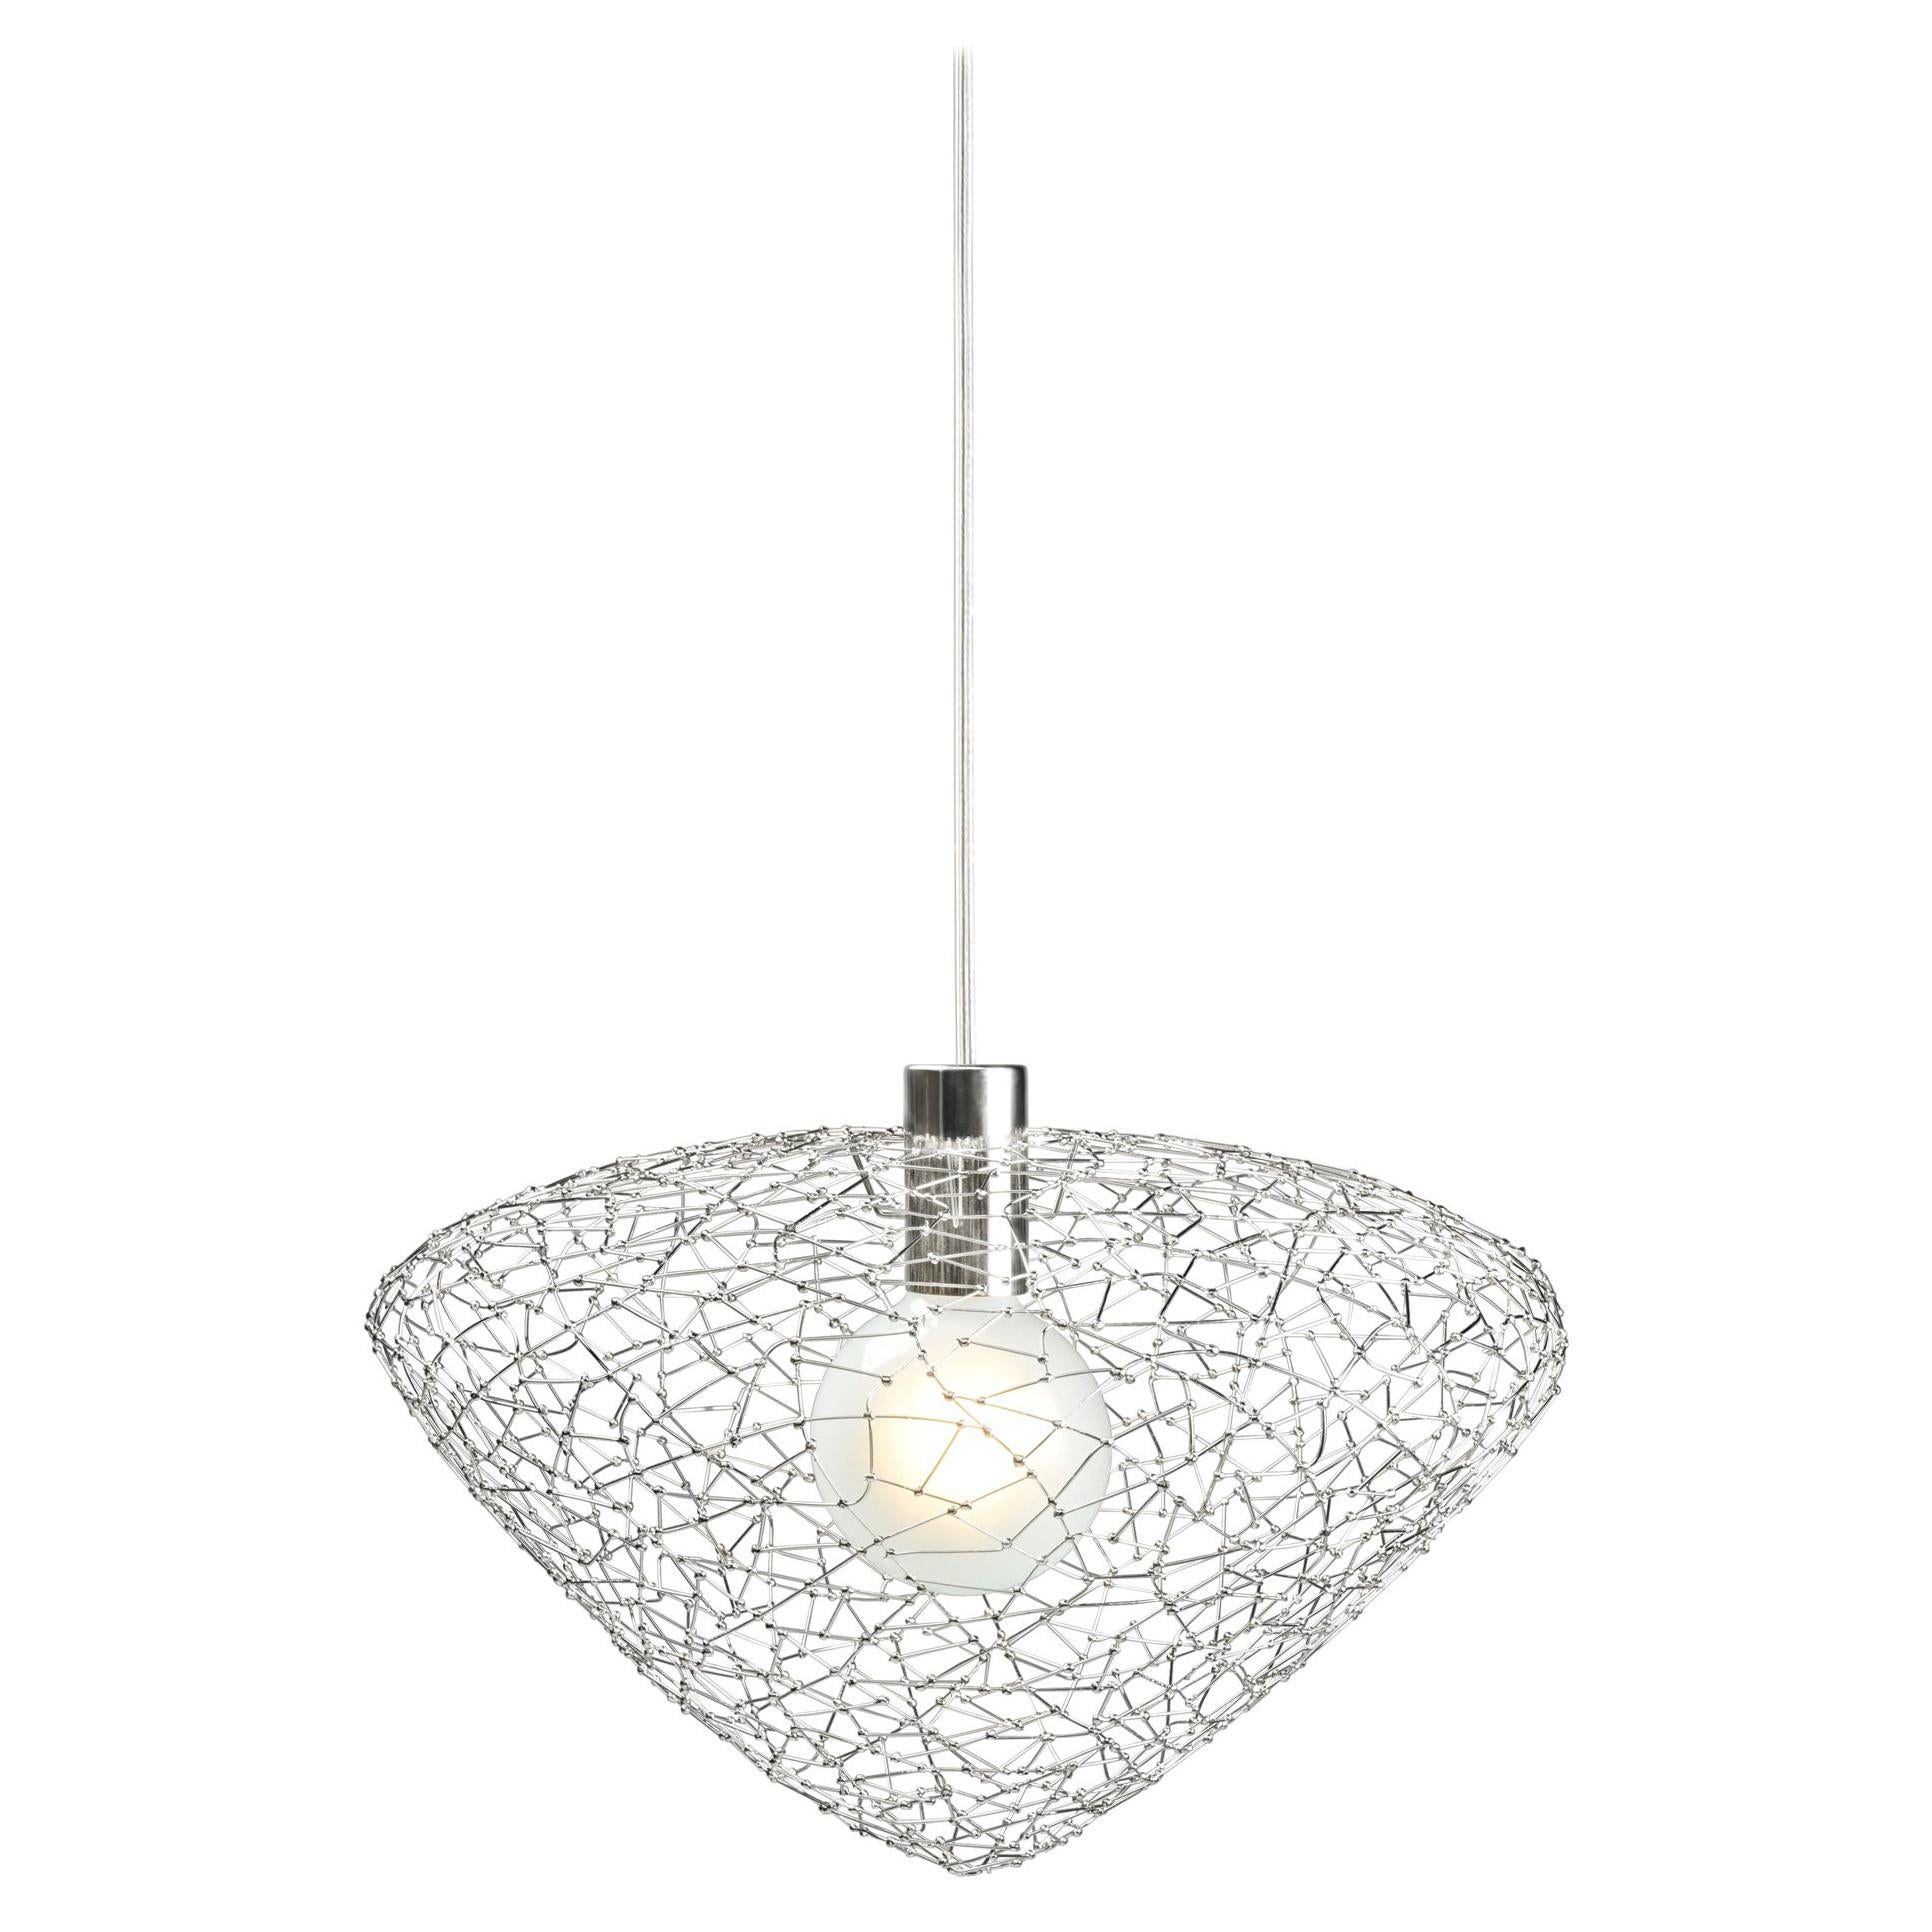 Daffy Diamond 'Silver' by Ango, Handcrafted Pendant Lights in Jewelry Look For Sale